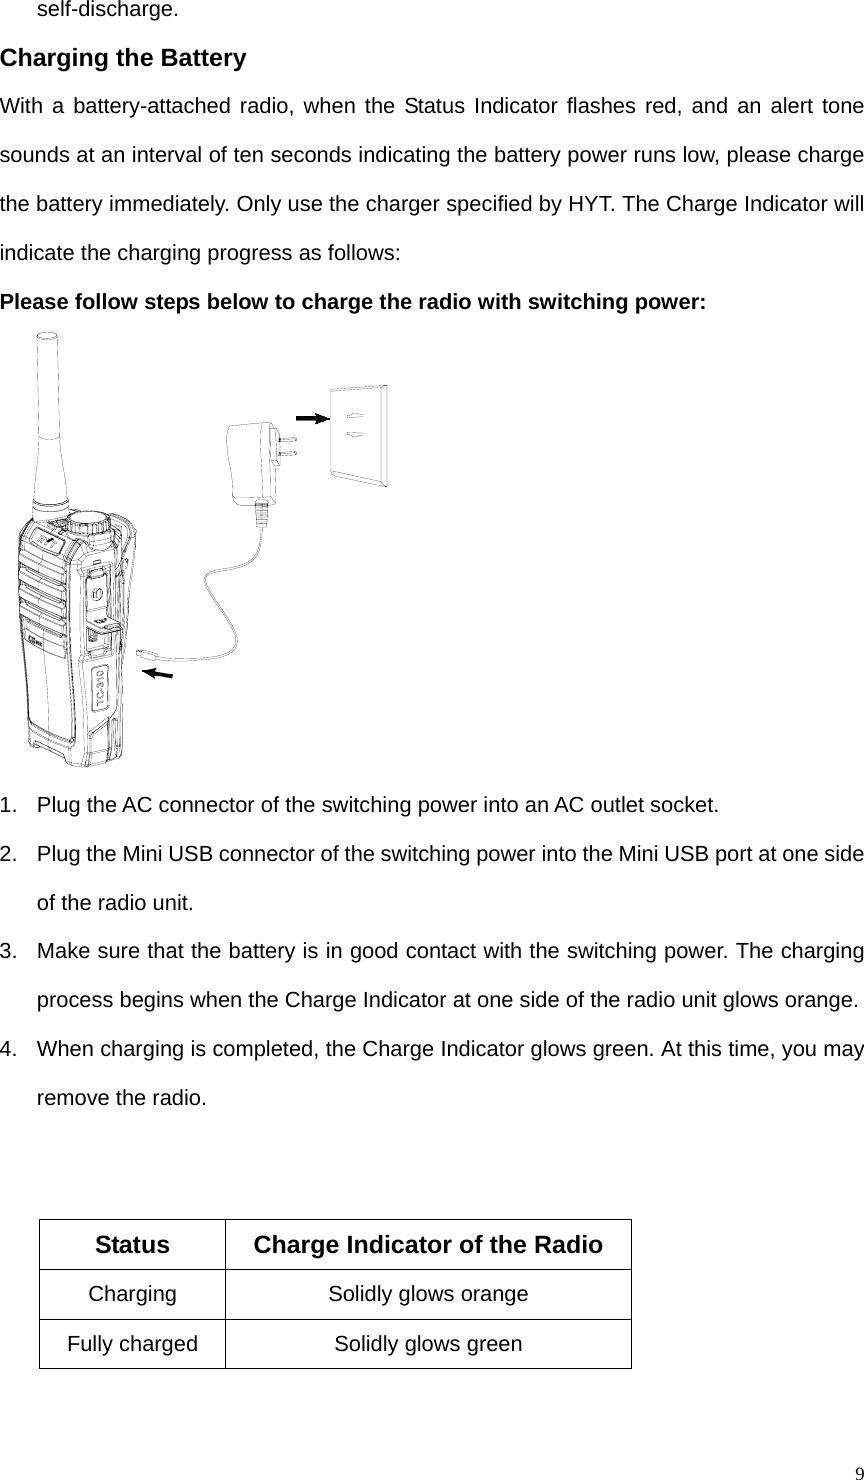   9self-discharge.  Charging the Battery With a battery-attached radio, when the Status Indicator flashes red, and an alert tone sounds at an interval of ten seconds indicating the battery power runs low, please charge the battery immediately. Only use the charger specified by HYT. The Charge Indicator will indicate the charging progress as follows:   Please follow steps below to charge the radio with switching power:    1.  Plug the AC connector of the switching power into an AC outlet socket. 2.  Plug the Mini USB connector of the switching power into the Mini USB port at one side of the radio unit.   3.  Make sure that the battery is in good contact with the switching power. The charging process begins when the Charge Indicator at one side of the radio unit glows orange.   4.  When charging is completed, the Charge Indicator glows green. At this time, you may remove the radio.     Status Charge Indicator of the Radio Charging    Solidly glows orange   Fully charged    Solidly glows green    